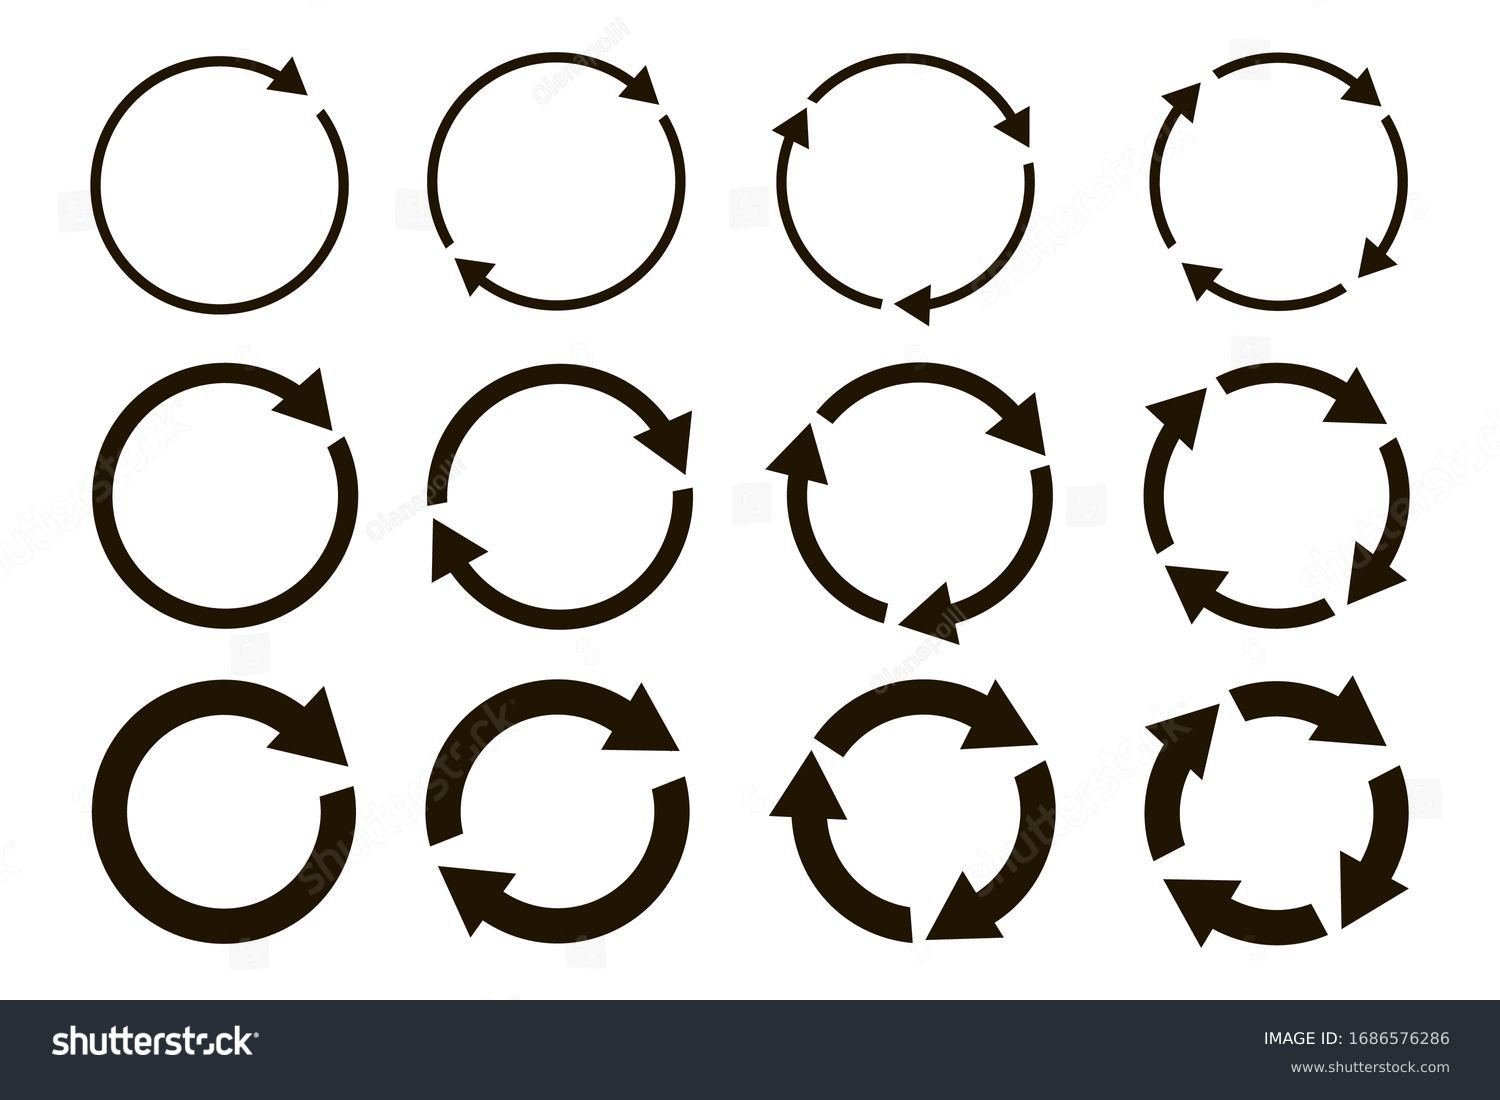 different circular arrows of black color, different thickness #1686576286